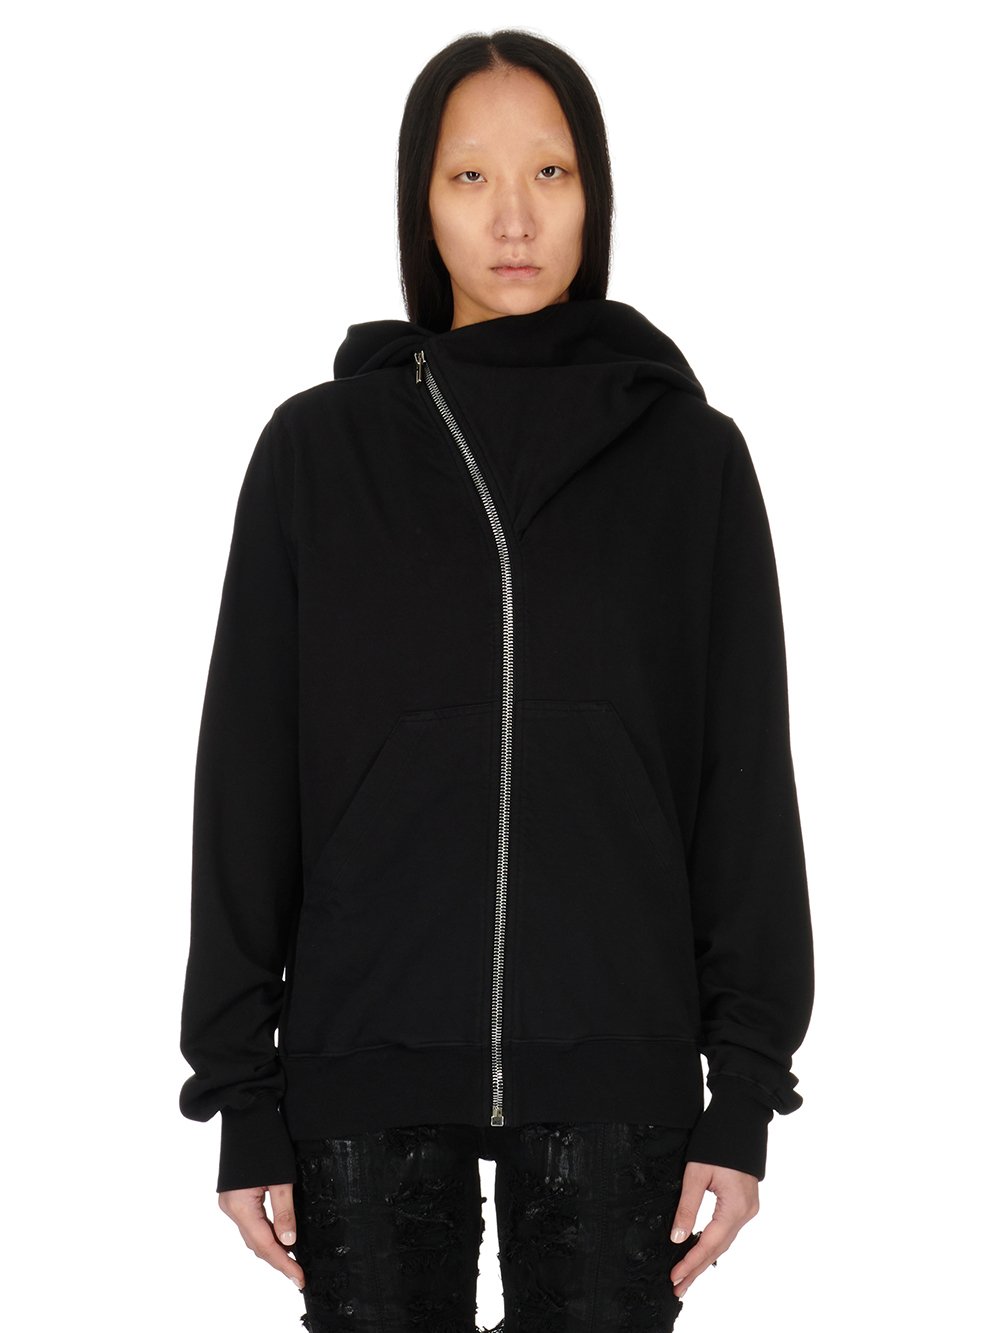 RICK OWENS FW23 LUXOR MOUNTAIN HOODIE IN BLACK COMPACT HEAVY COTTON JERSEY